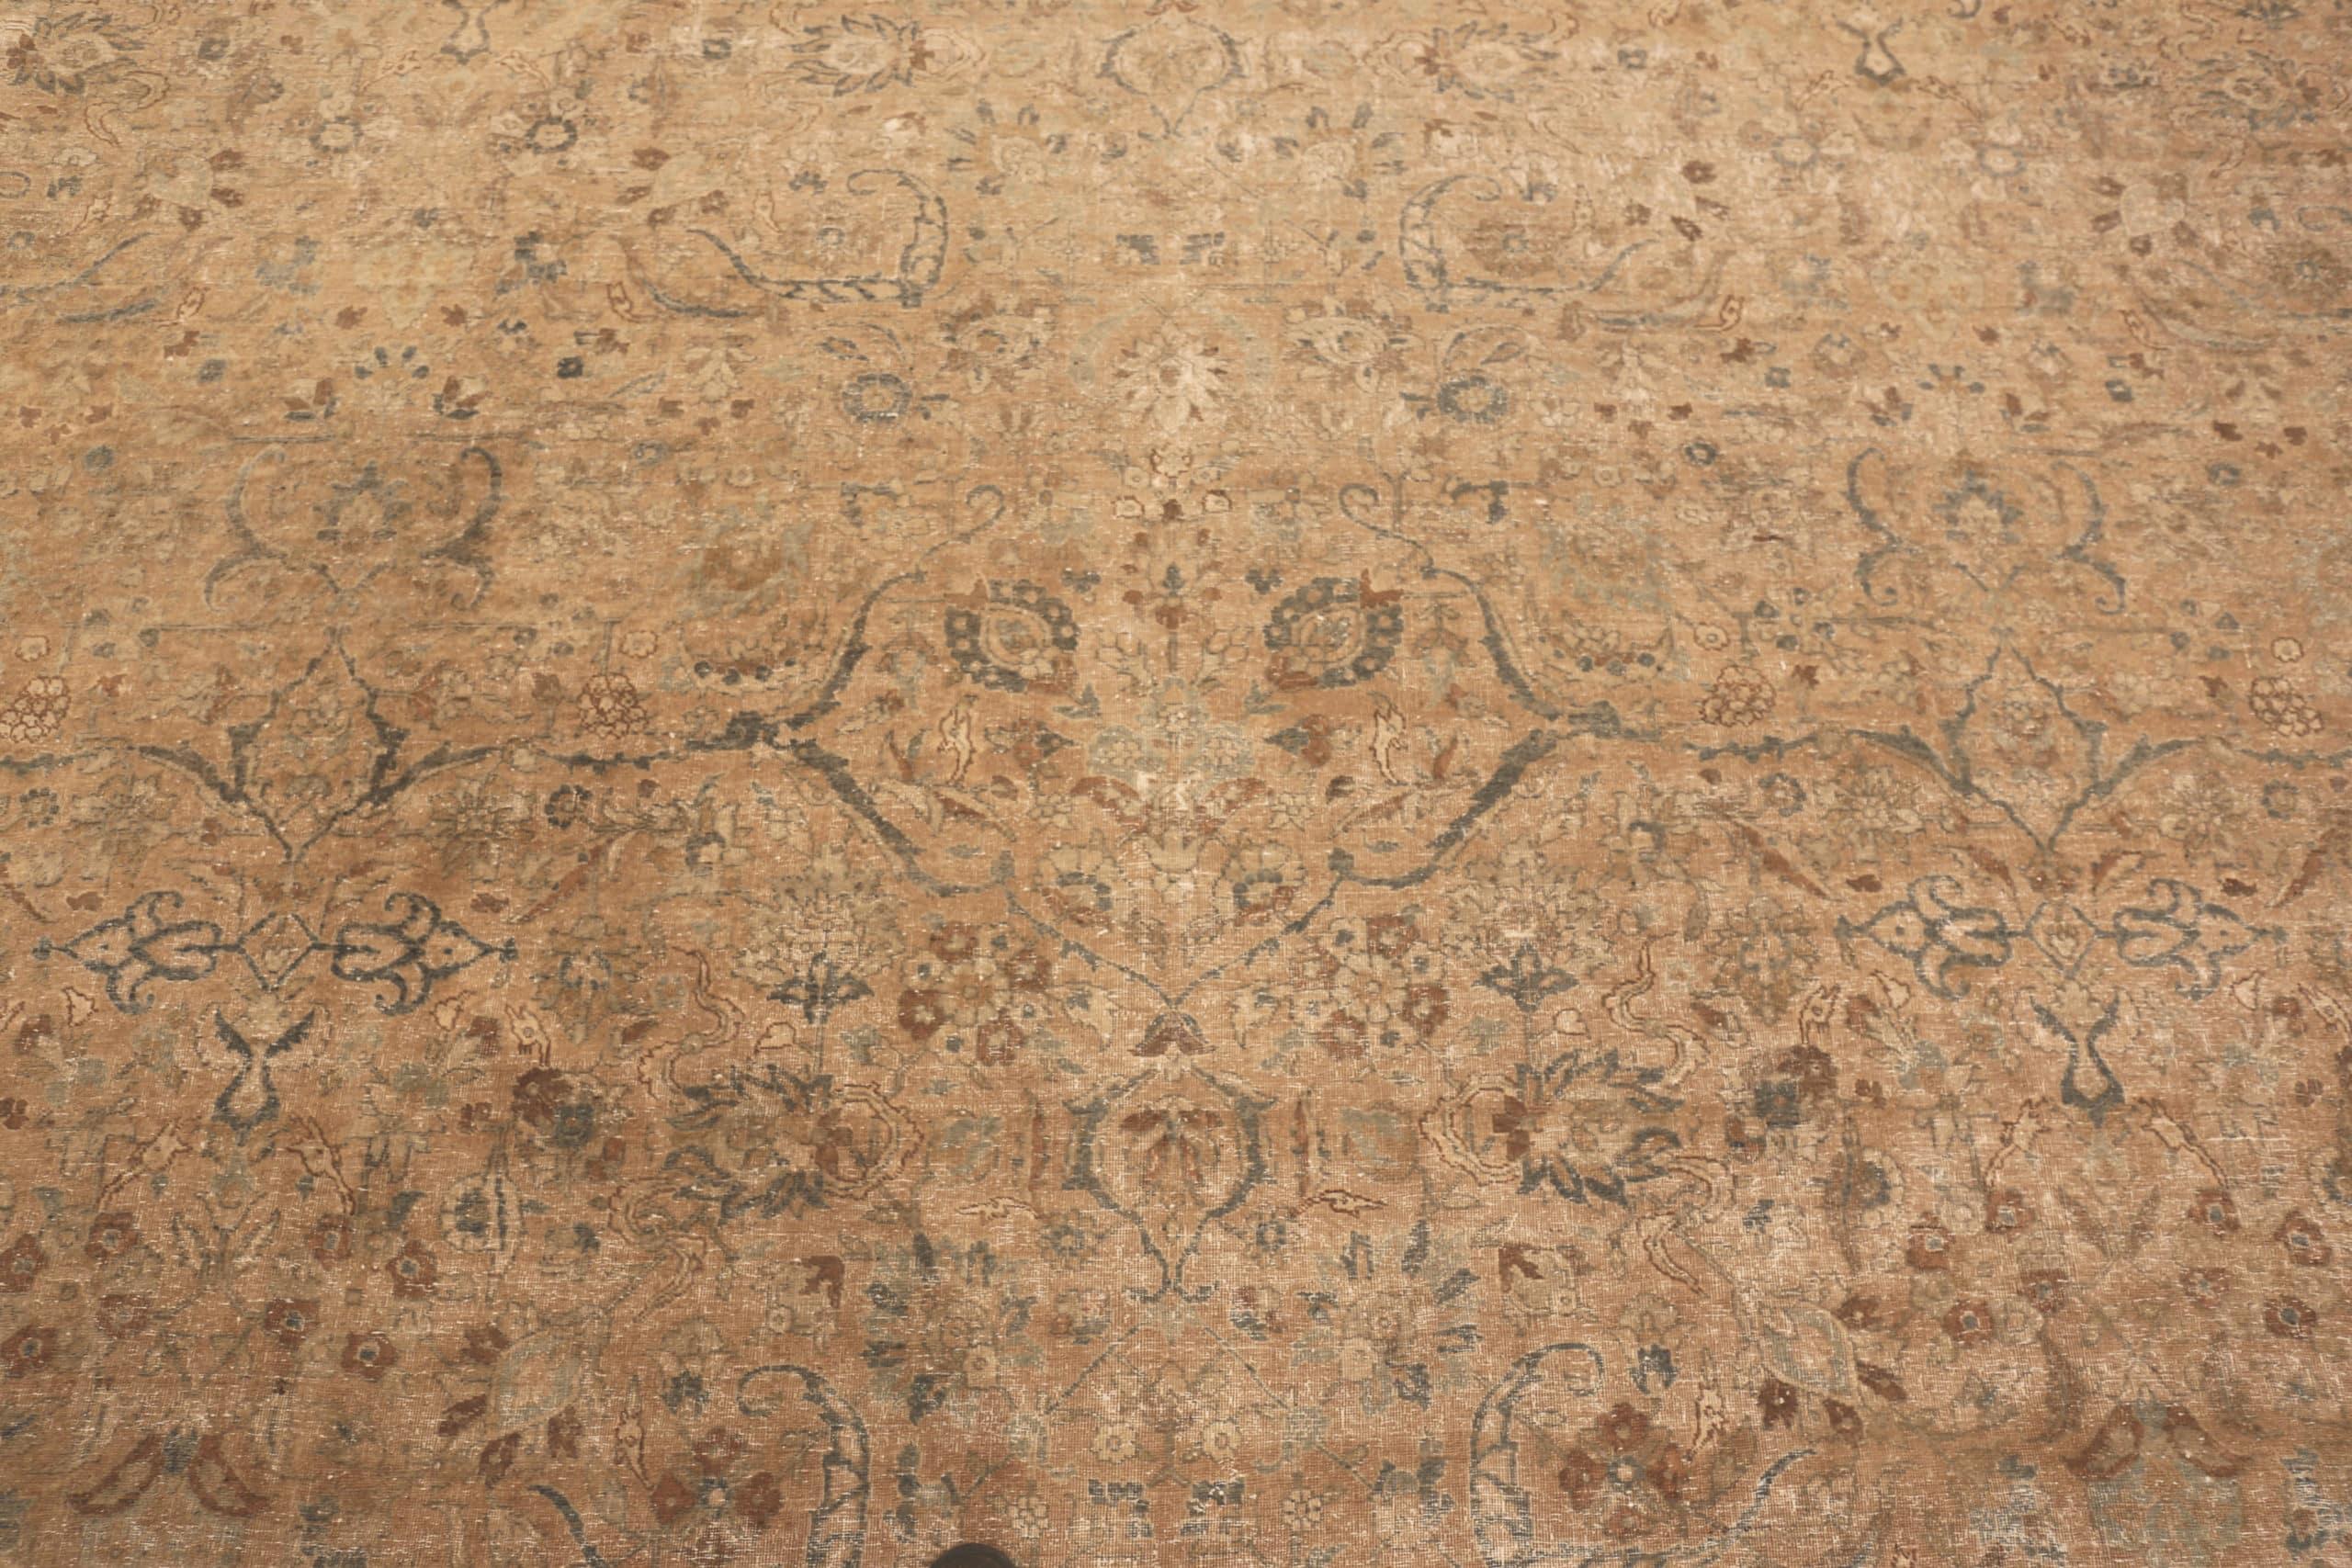 Antique Persian Floral Tabriz Rug. 12 ft 10 in x 21 ft 3 in In Good Condition For Sale In New York, NY